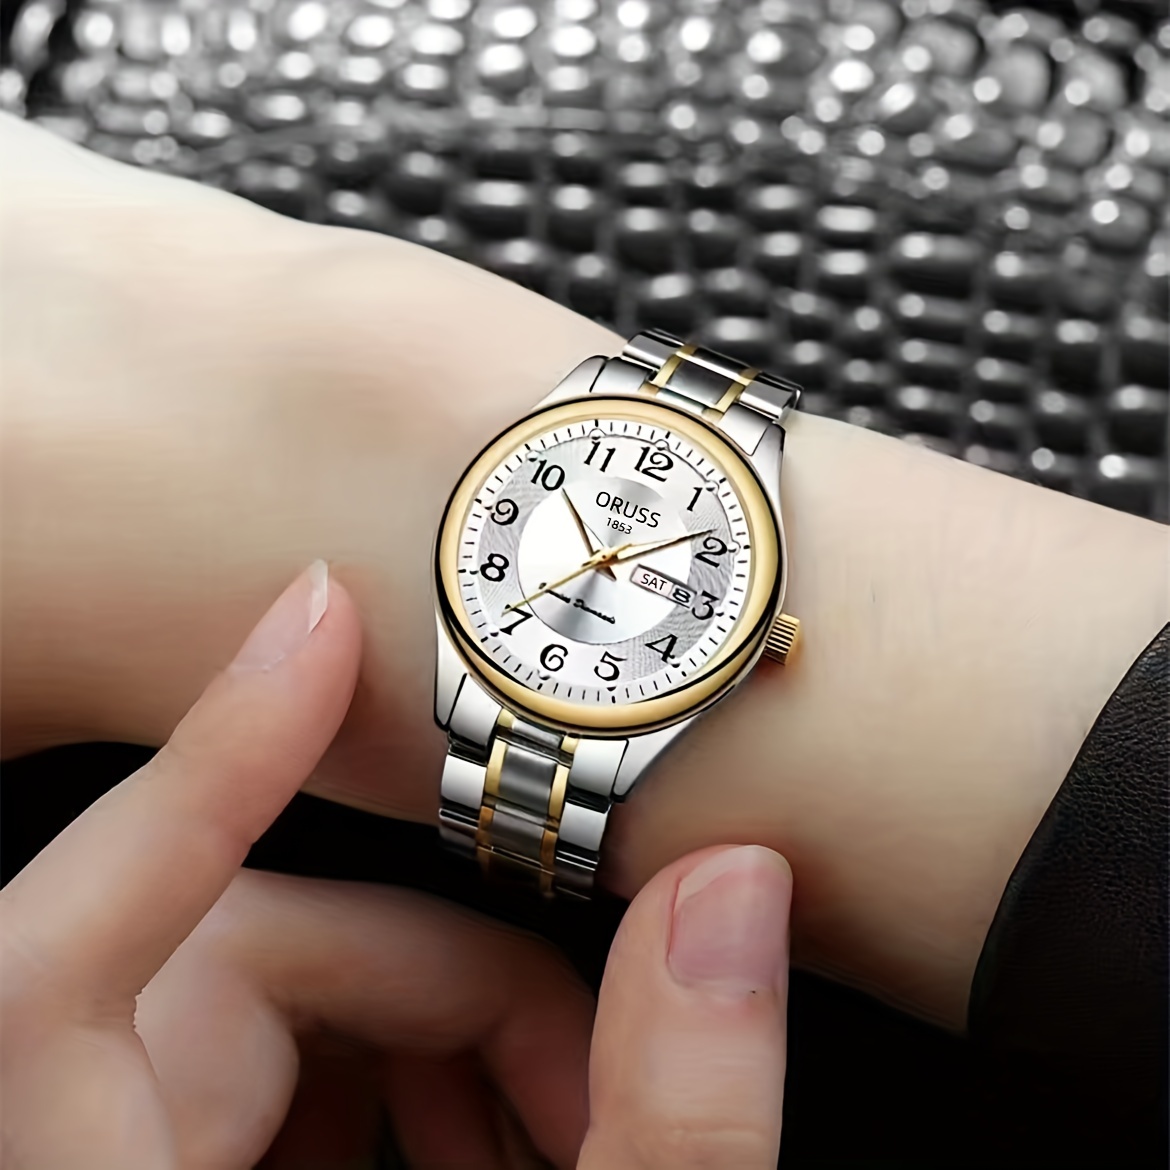 

Casual Luminous Quartz Watch Ladies Textured Dial Calendar Analog Water Resist Wristwatch For Daily Life Travel Date Watch